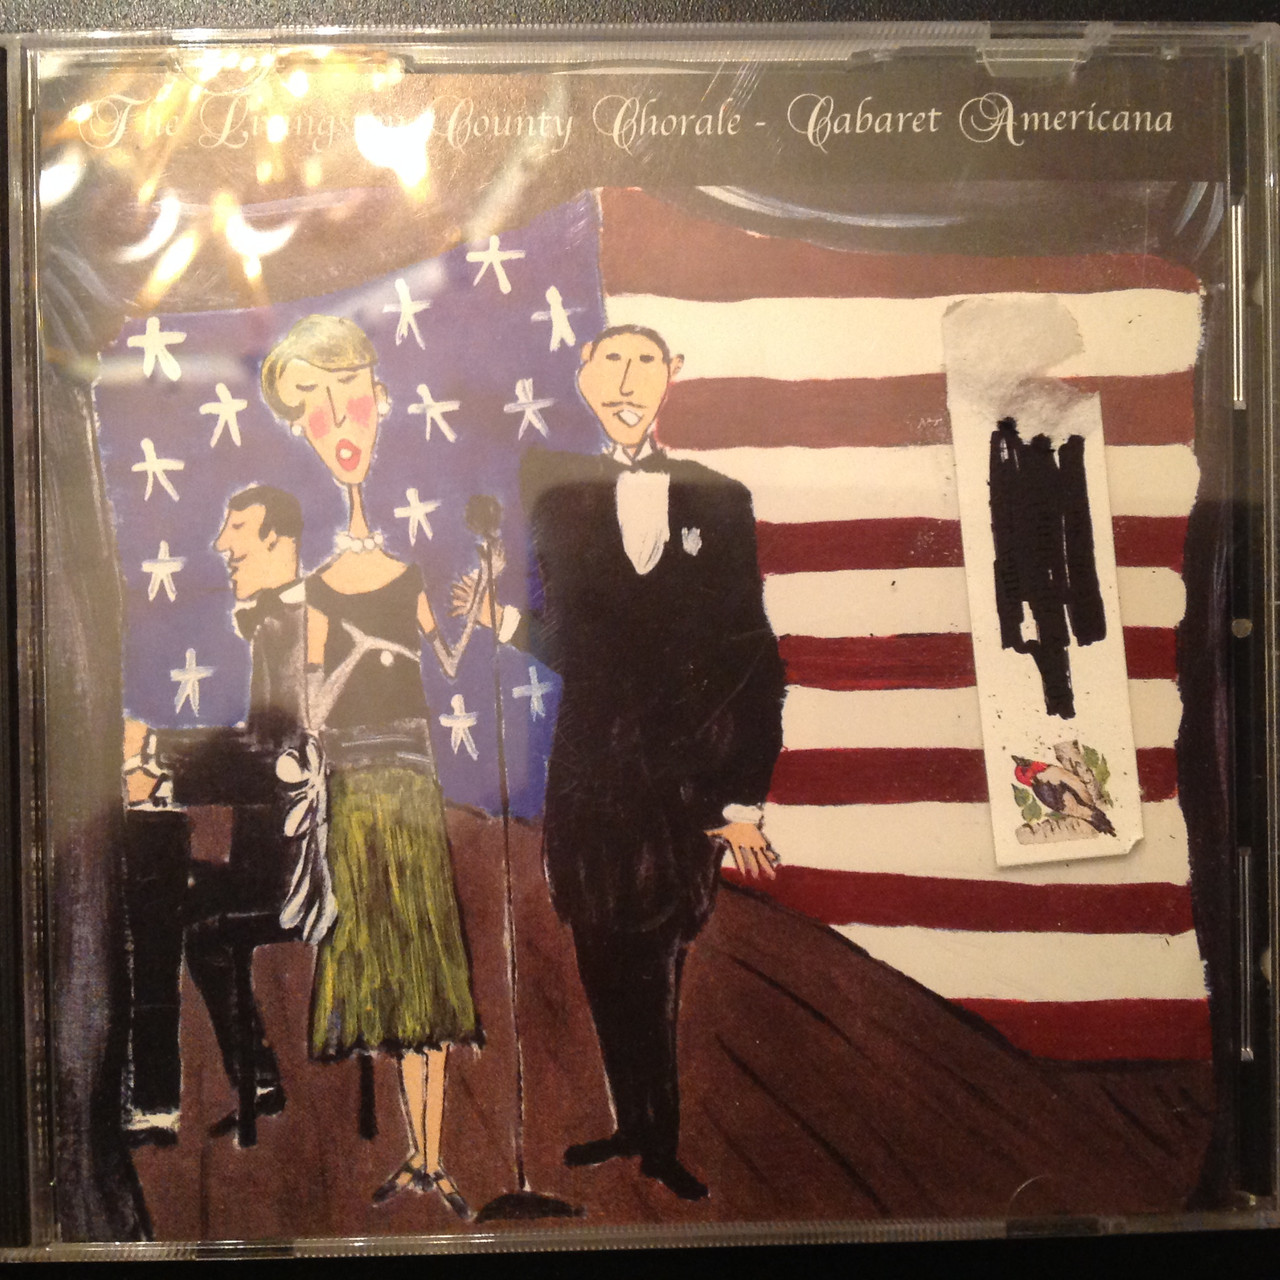 Cabaret Americana by The Livingston County Chorale CD